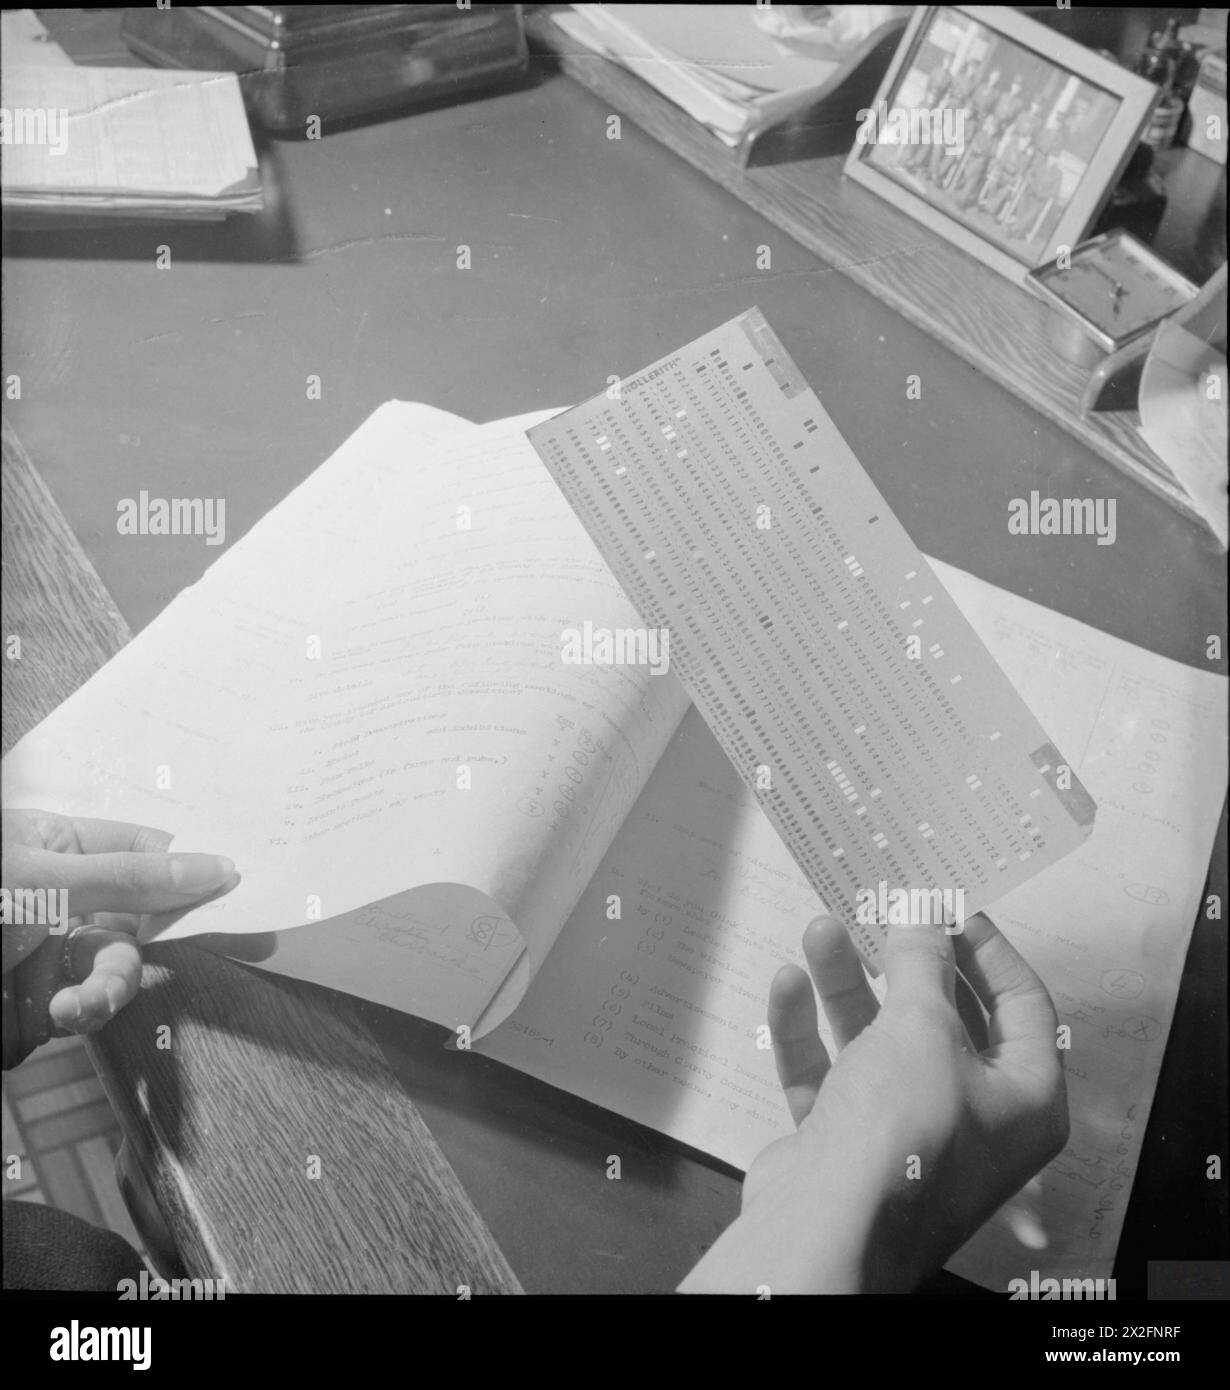 WARTIME SOCIAL SURVEY: INFORMATION GATHERING IN WARTIME BRITAIN, UK, 1944 - The information which has been gathered by interviewers arrives at the Wartime Social Survey as a series of ringed answers to questions on questionnaires. These answers are given code numbers which are then transferred to punched cards, with each hole representing the code number for a particular answer Stock Photo